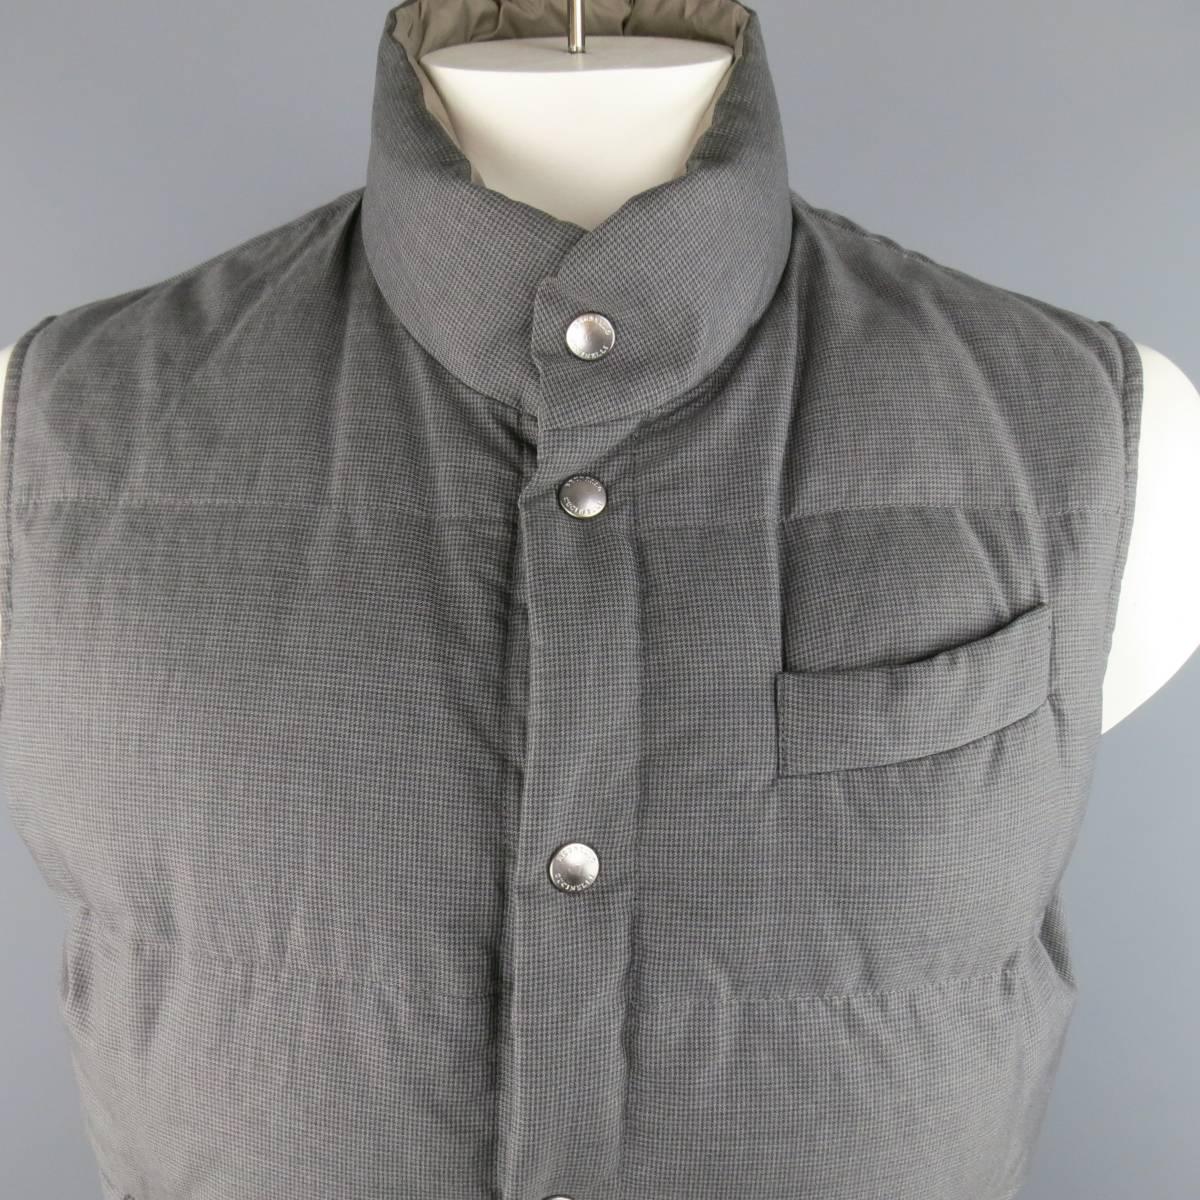 BRUNELLO CUCINELLI Vest consists of cotton material in a grey color tone. Designed in a reversible style, solid taupe and houndstooth pattern. Top pocket square with bottom side pockets. Silver button detail and elastic waist hem. Made in Italy.
